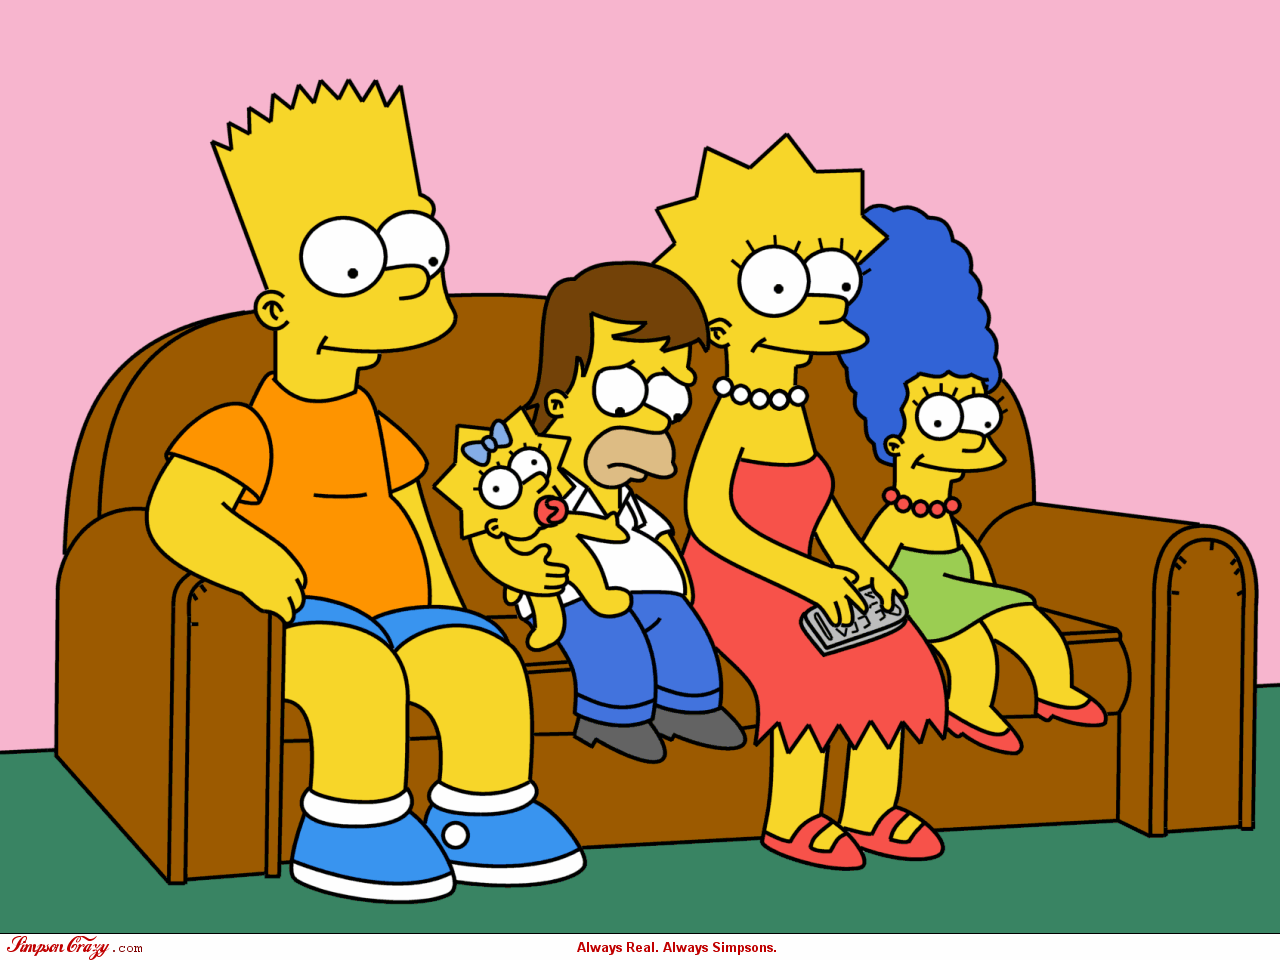 The Simpsons Picture